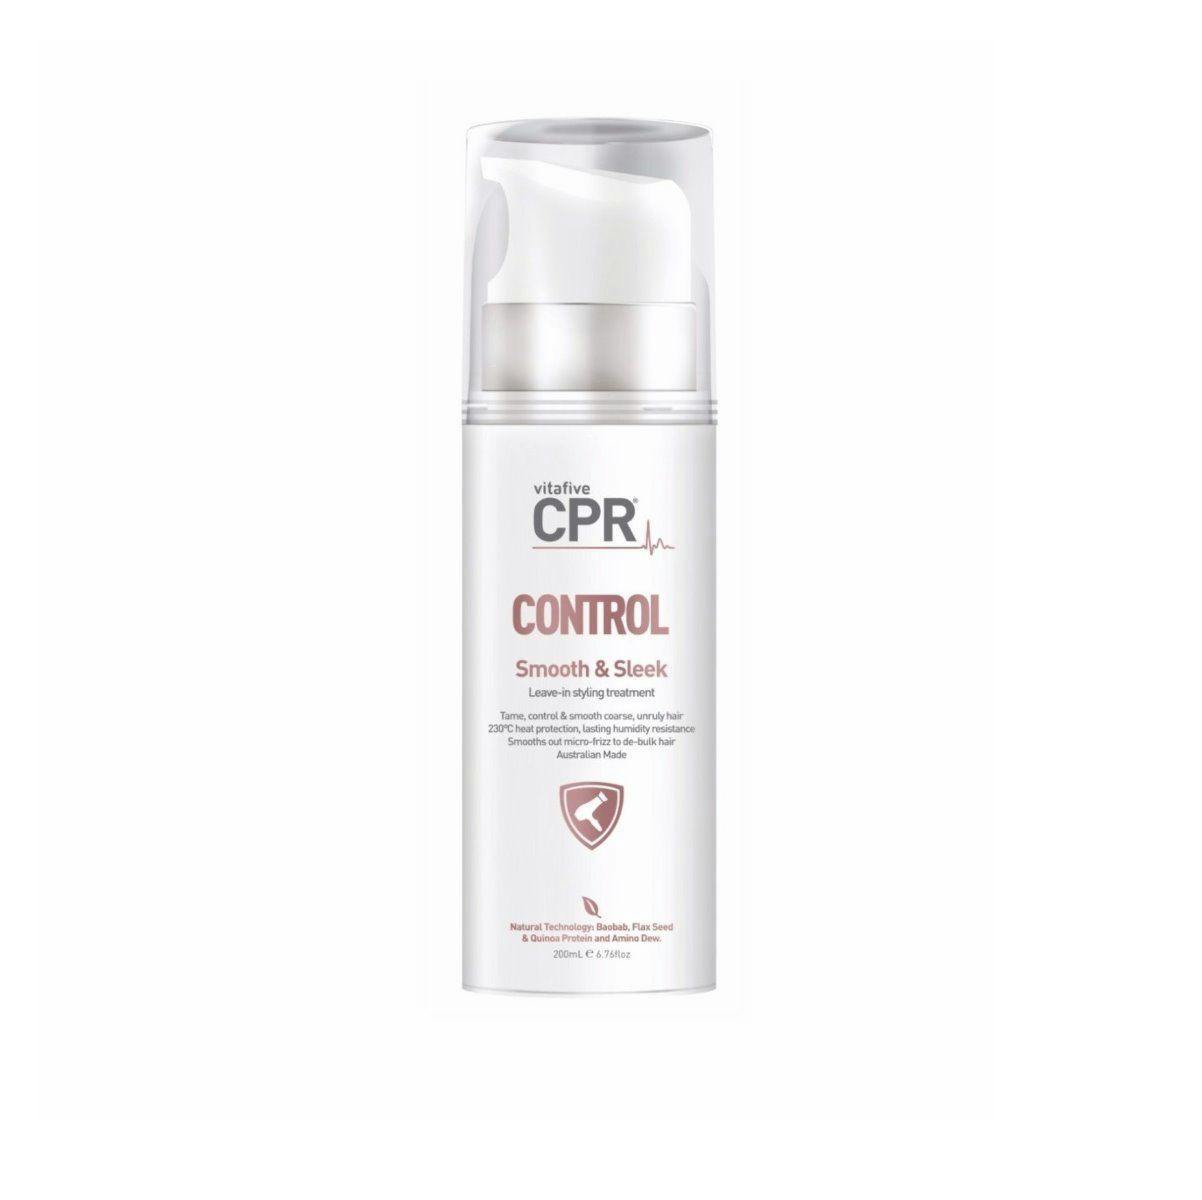 Vitafive CPR Control Smooth & Sleek Leave-in Styling Treatment 200ml